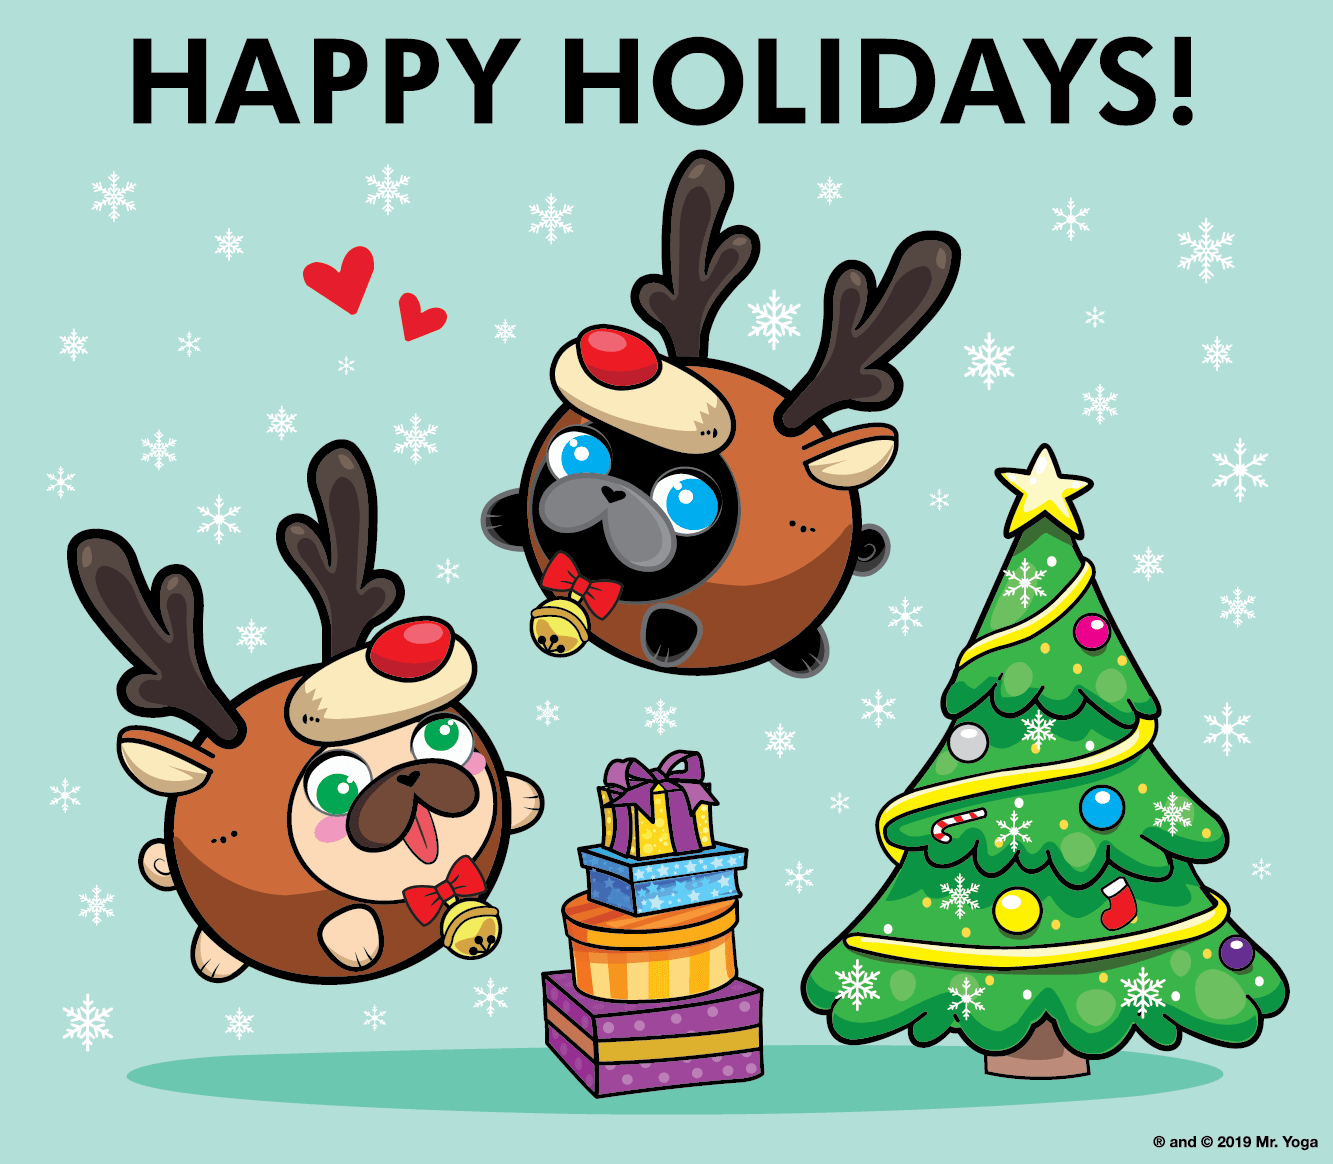 Poopy & Doopy - HAPPY HOLIDAYS